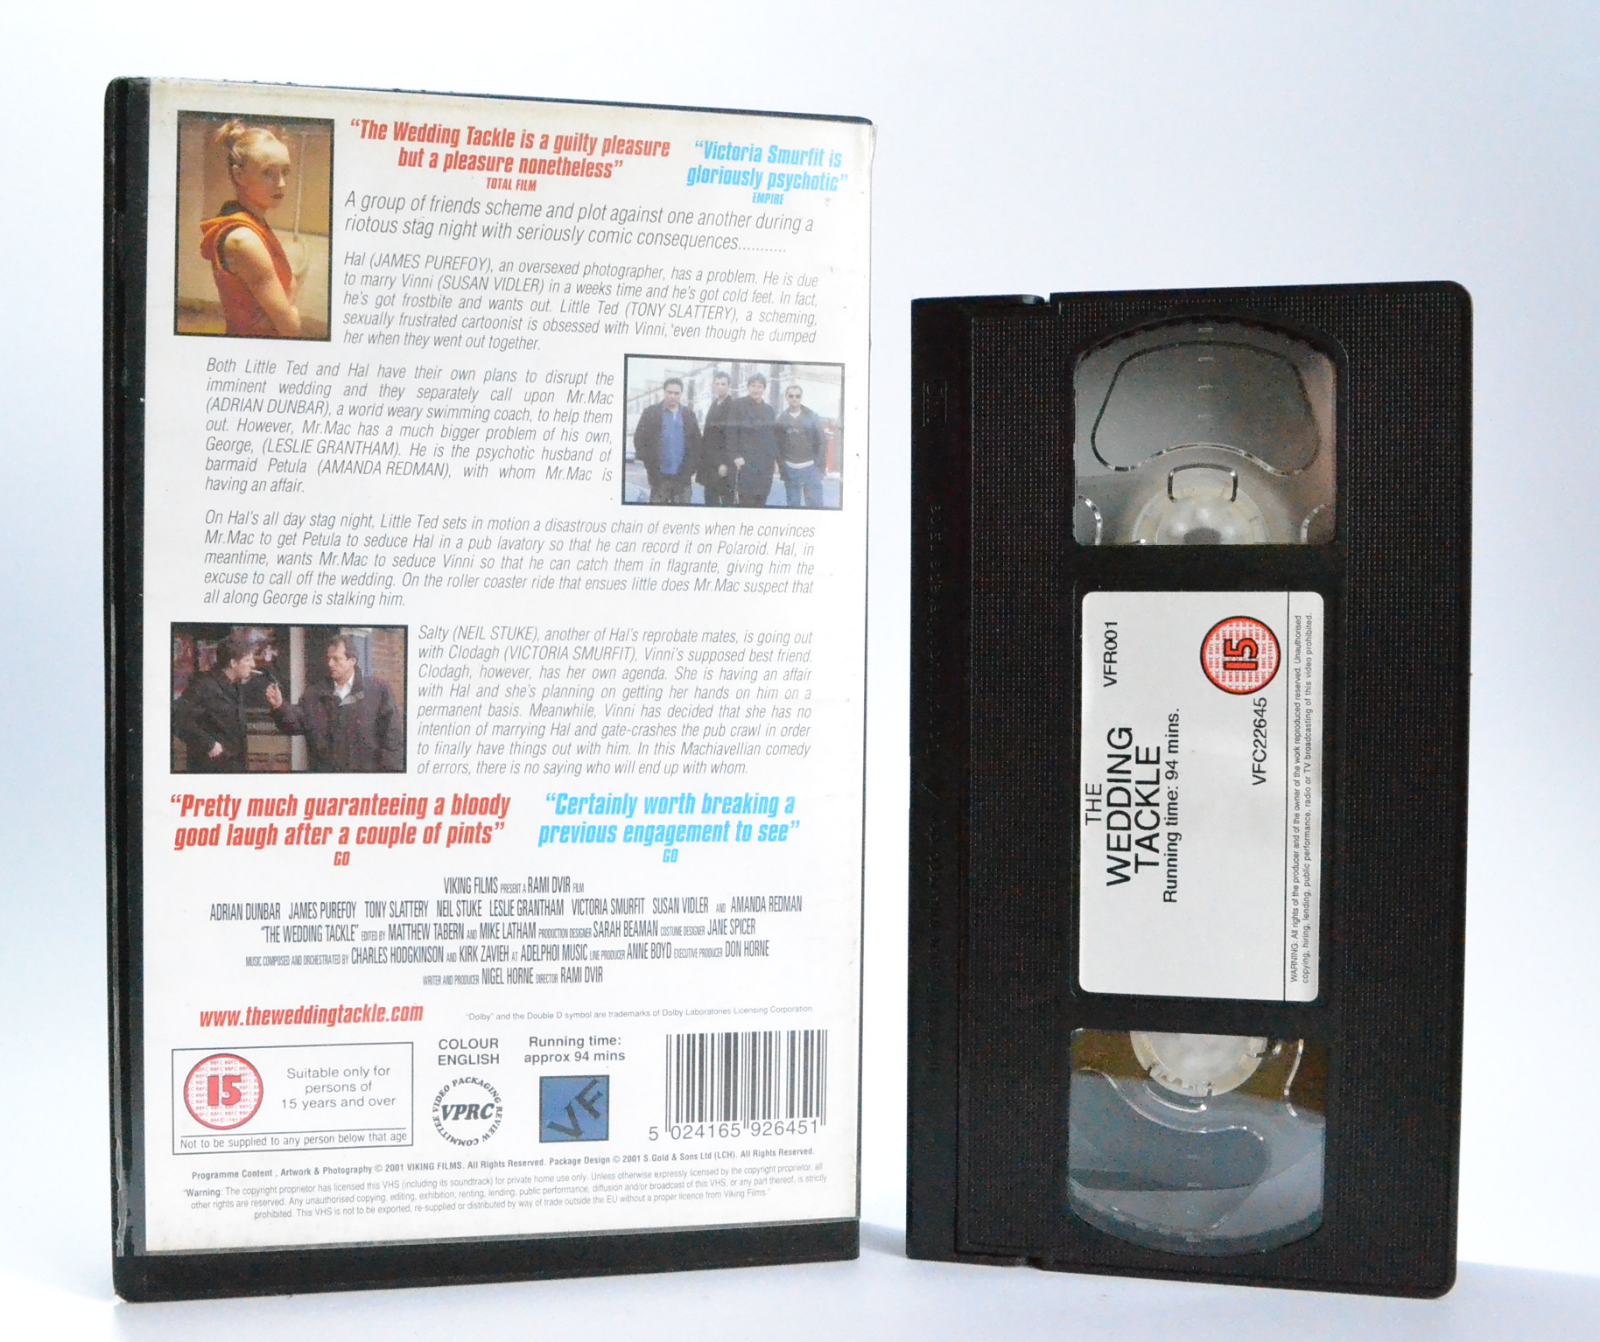 The Wedding Tackle: (2000) British Comedy - Large Box - Guilty Pleasure - VHS-